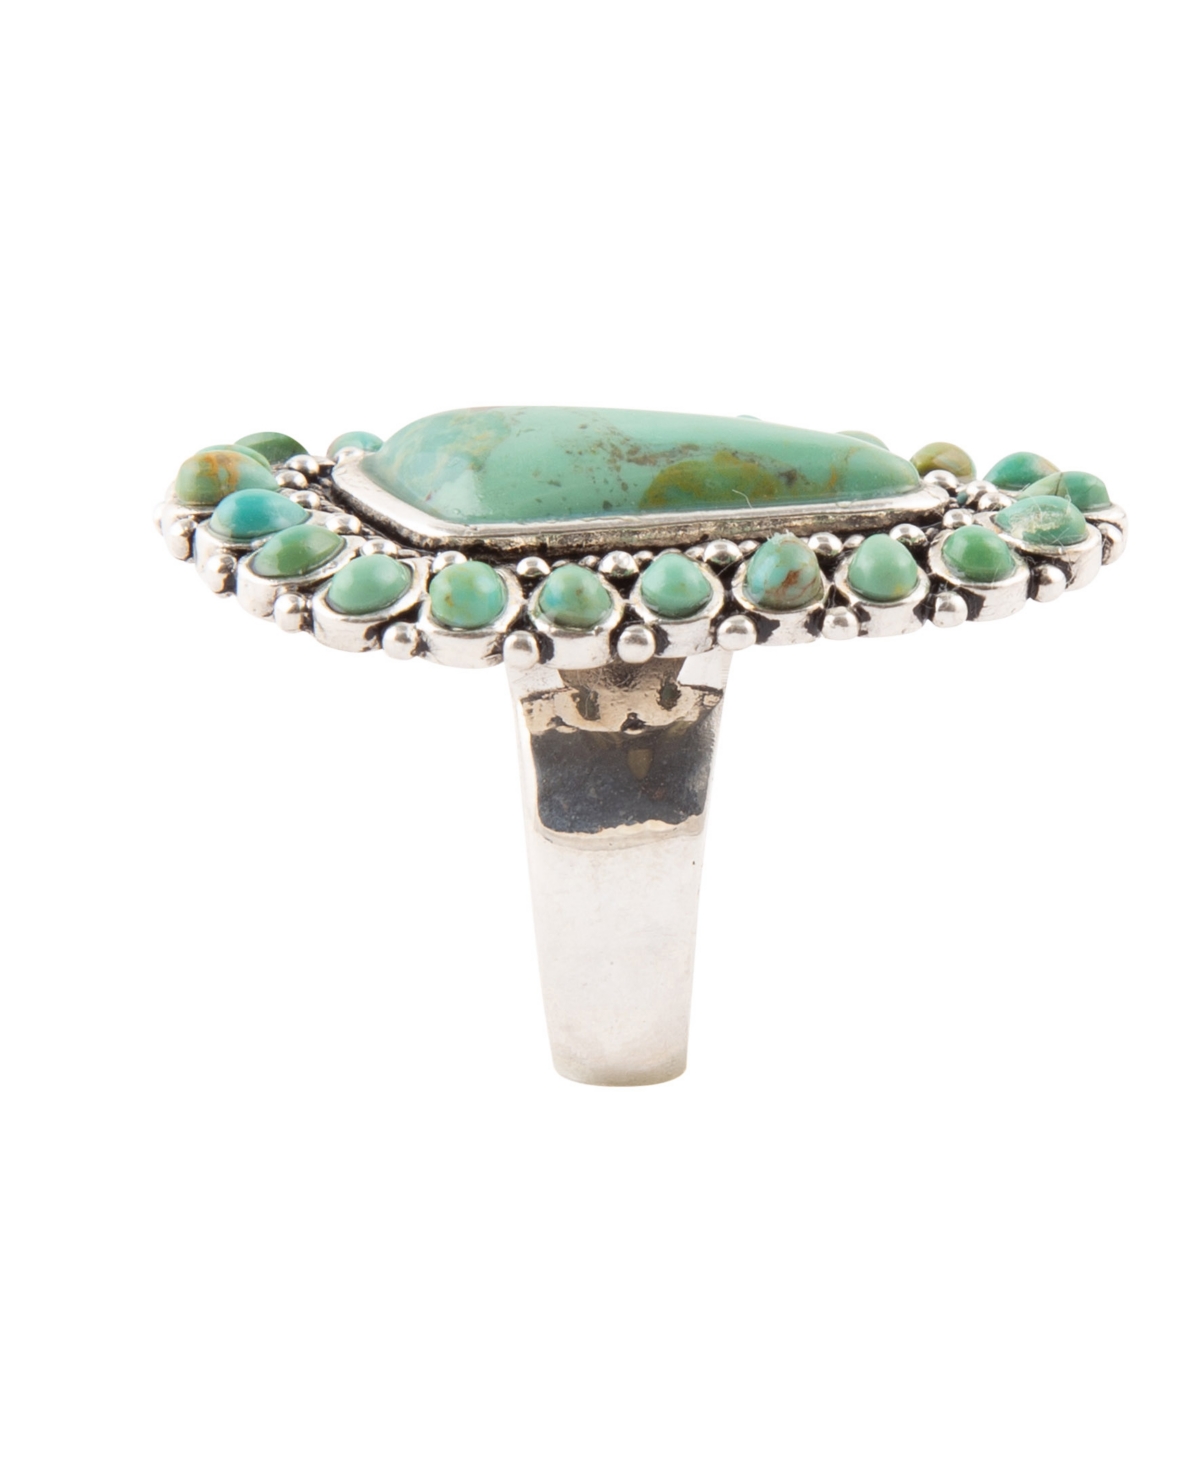 Shop Barse Sedona Genuine Turquoise Abstract Band Ring